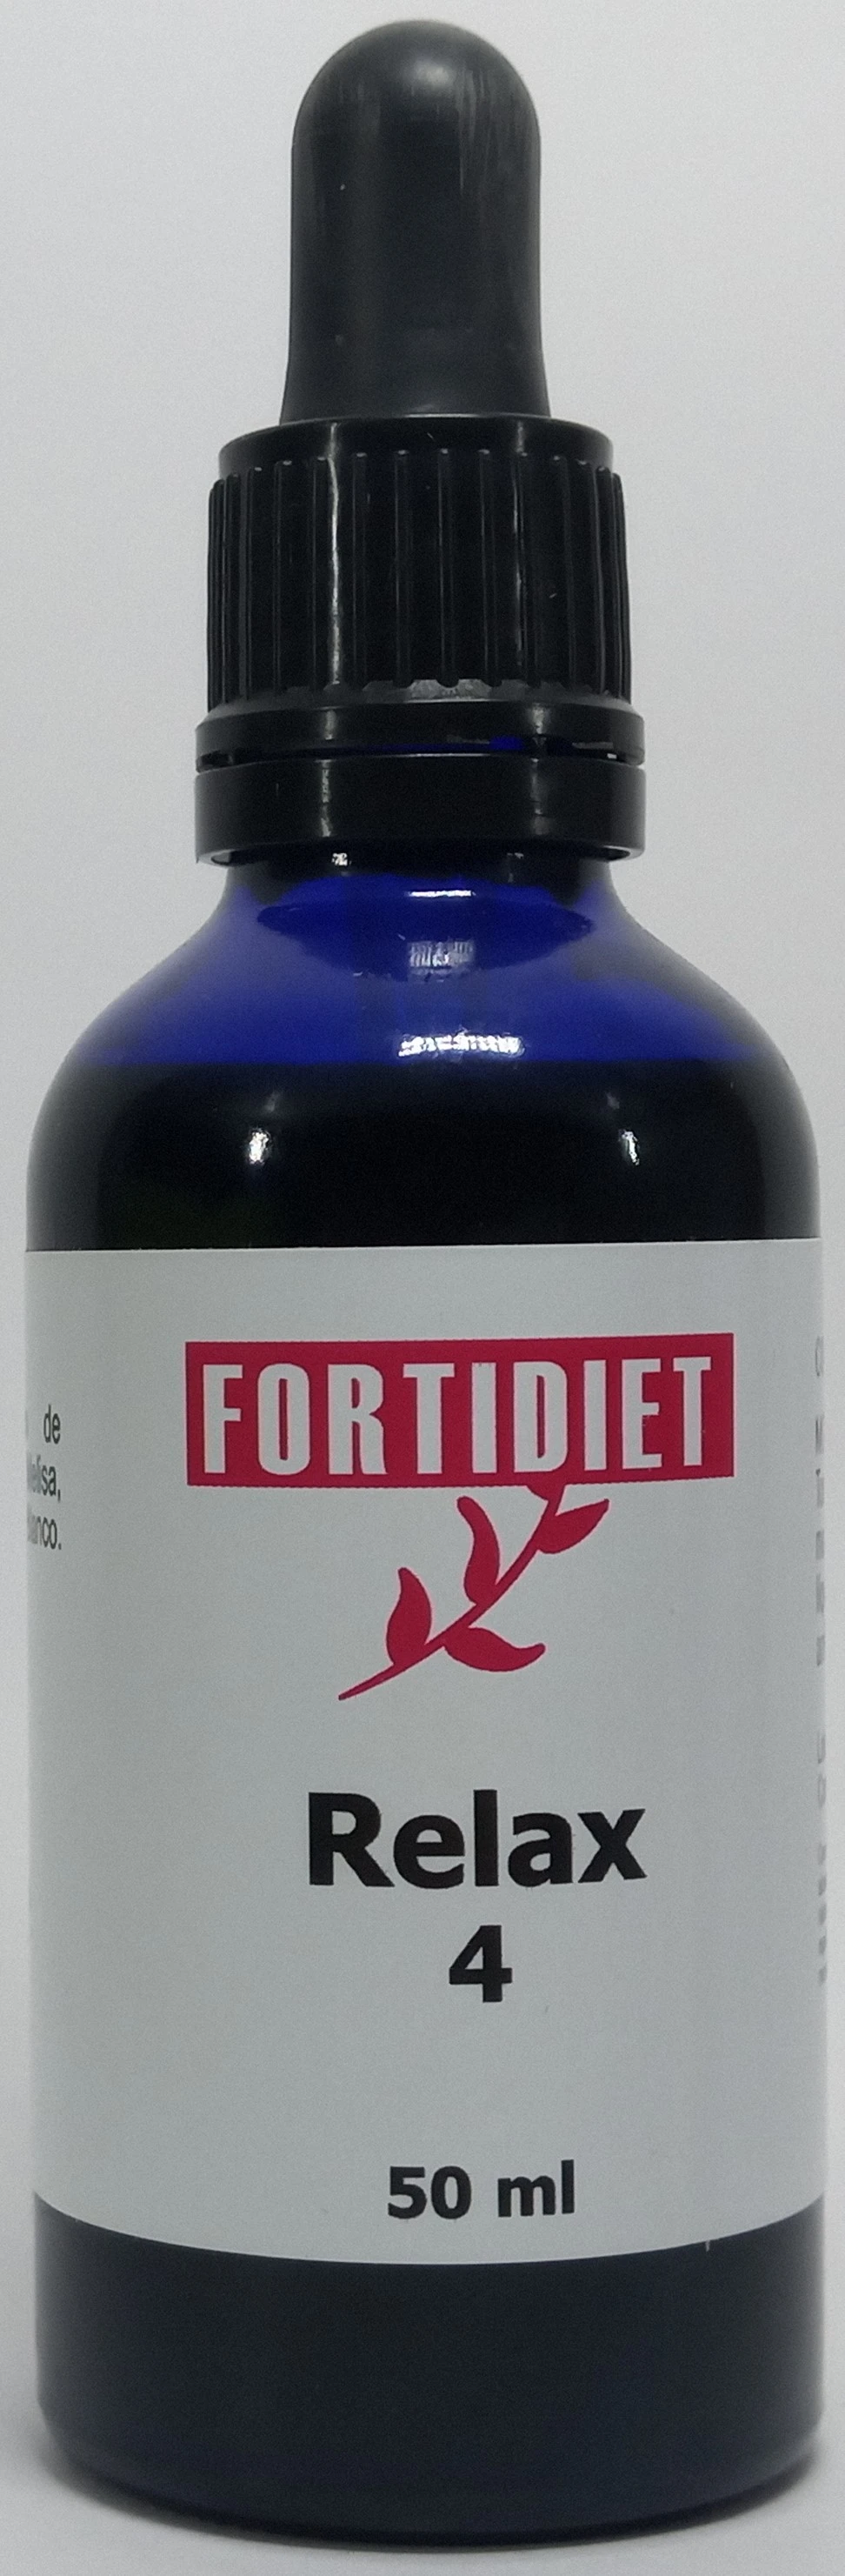 Fortidiet Relax - 4 e.f.